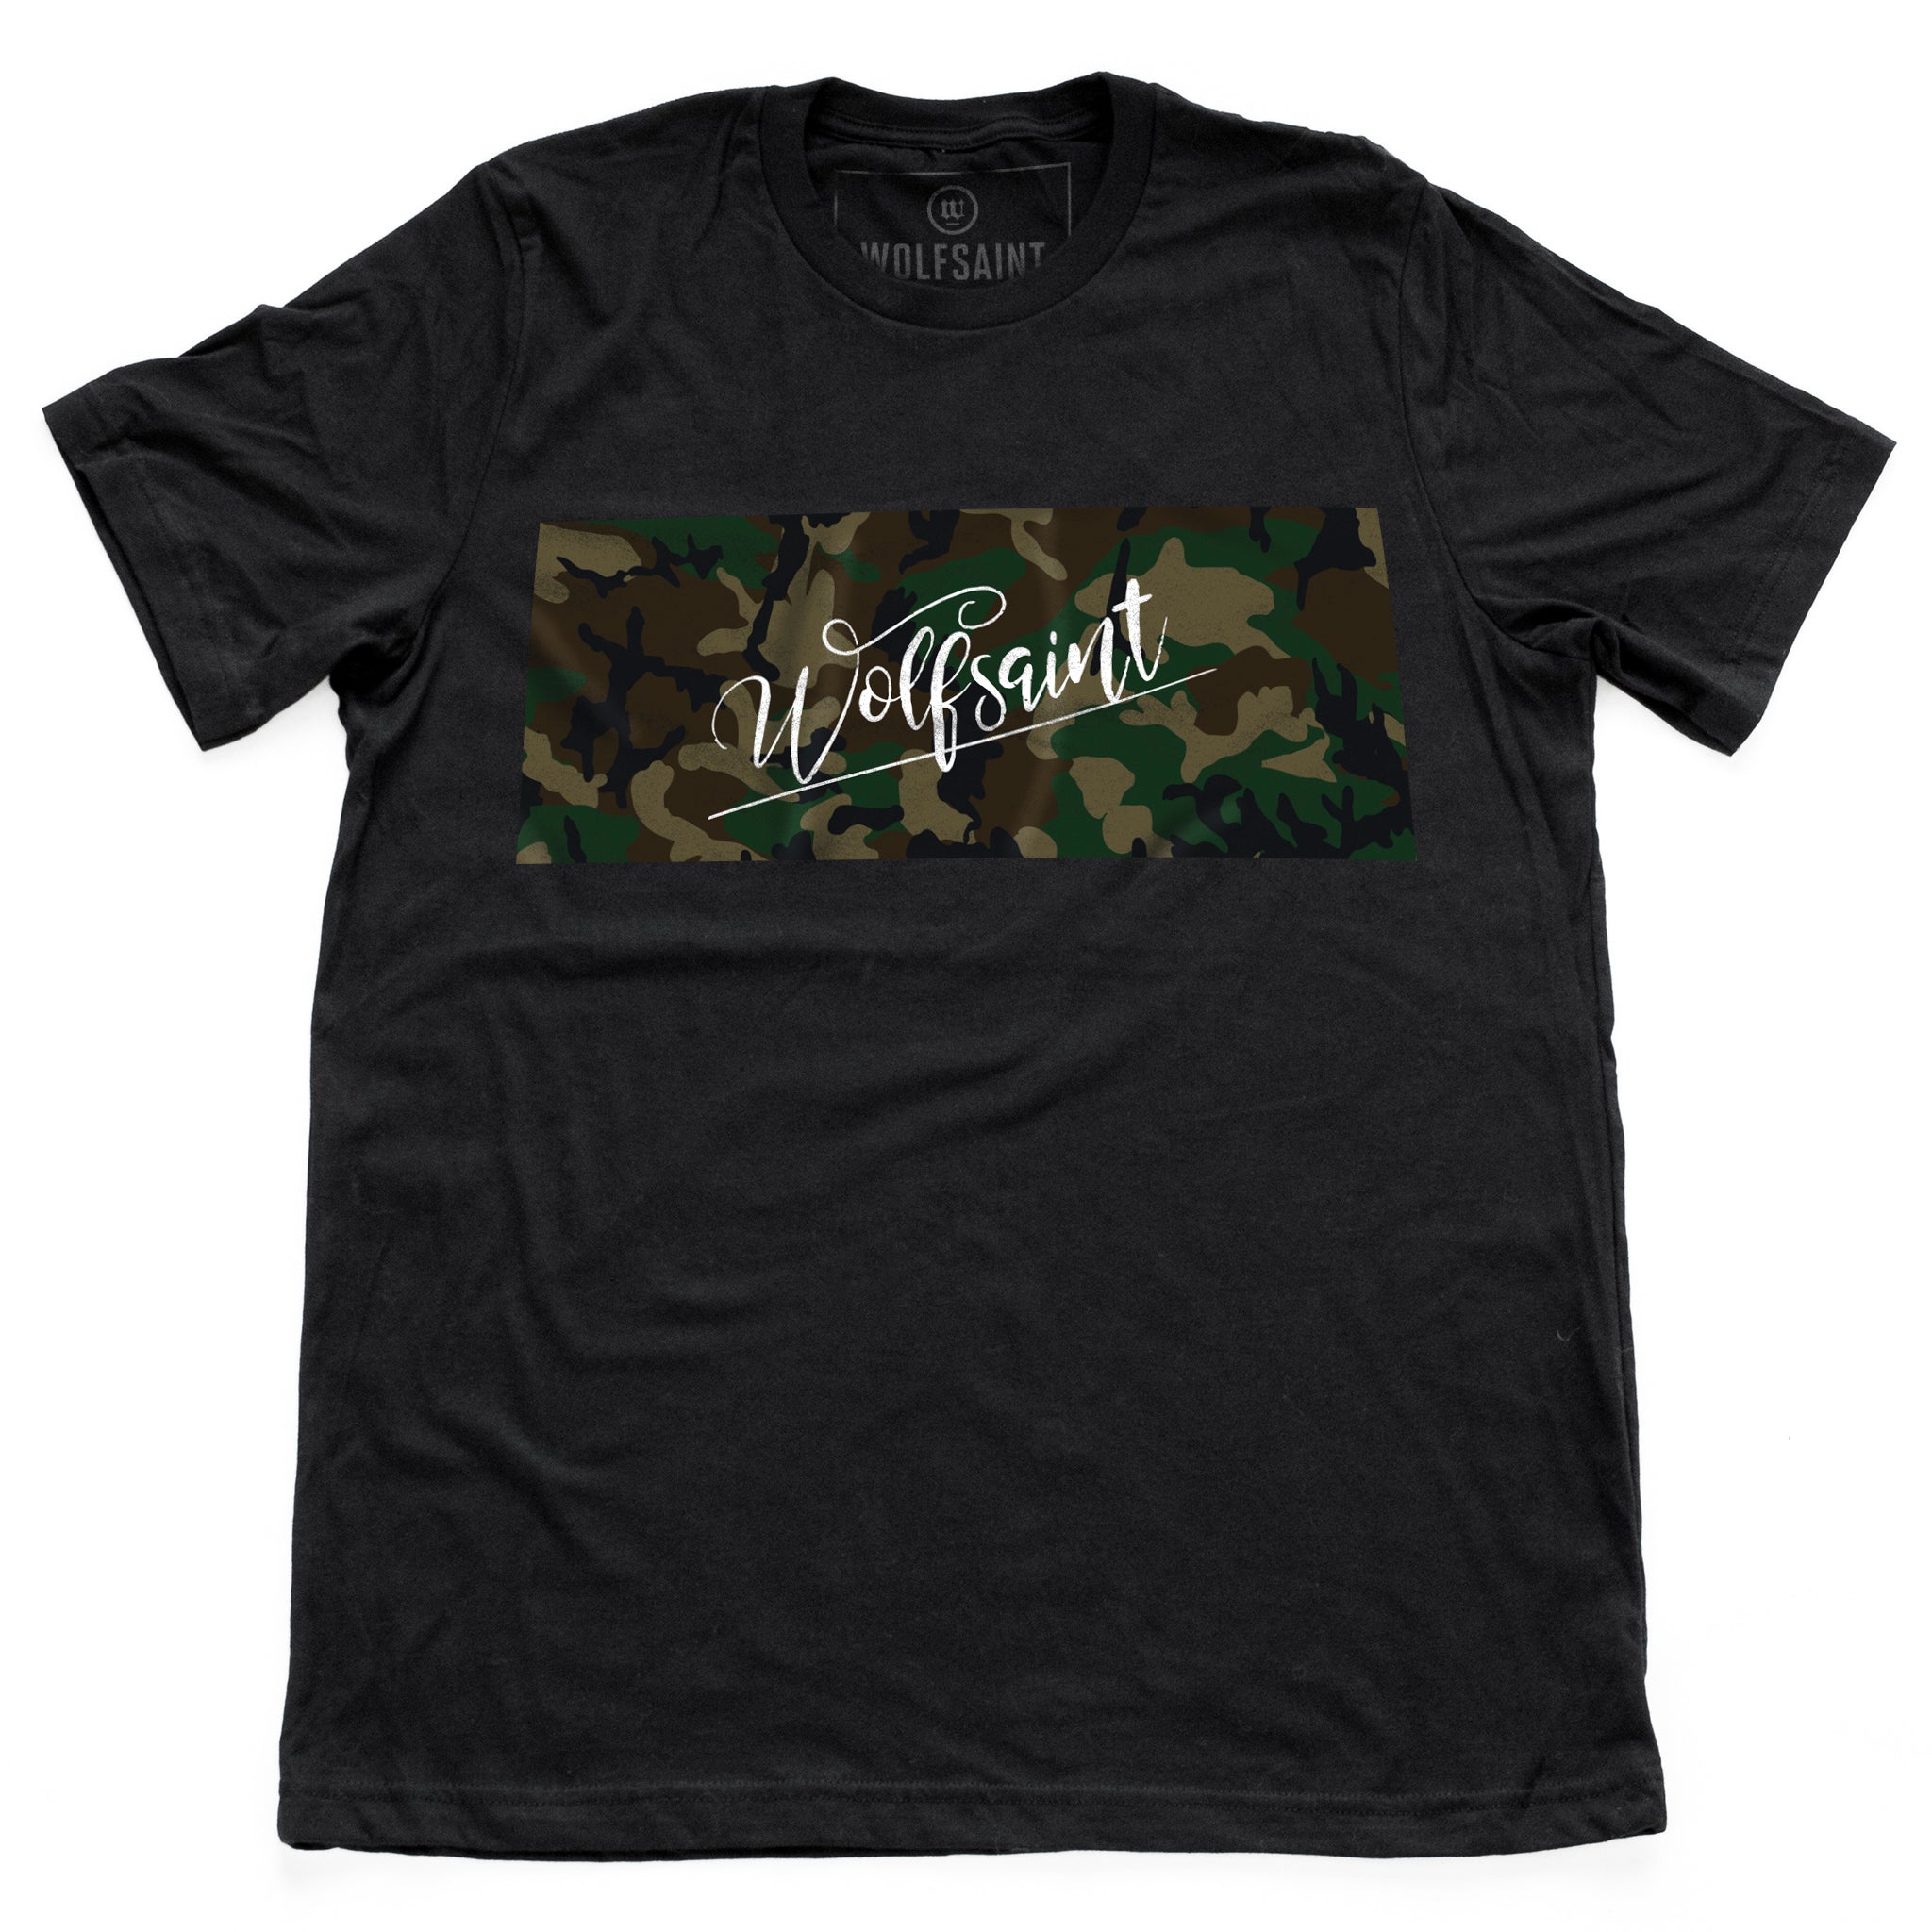 The front of a fashionable black t-shirt with a camo / camouflage panel on both sides. On the front there is also a Wolfsaint script logo within the camo panel; on the reverse are the Wolfsaint cities “New York, Rio de Janeiro, Los Angeles” listed innsmaller type below the camouflage. From Wolfsaint.net